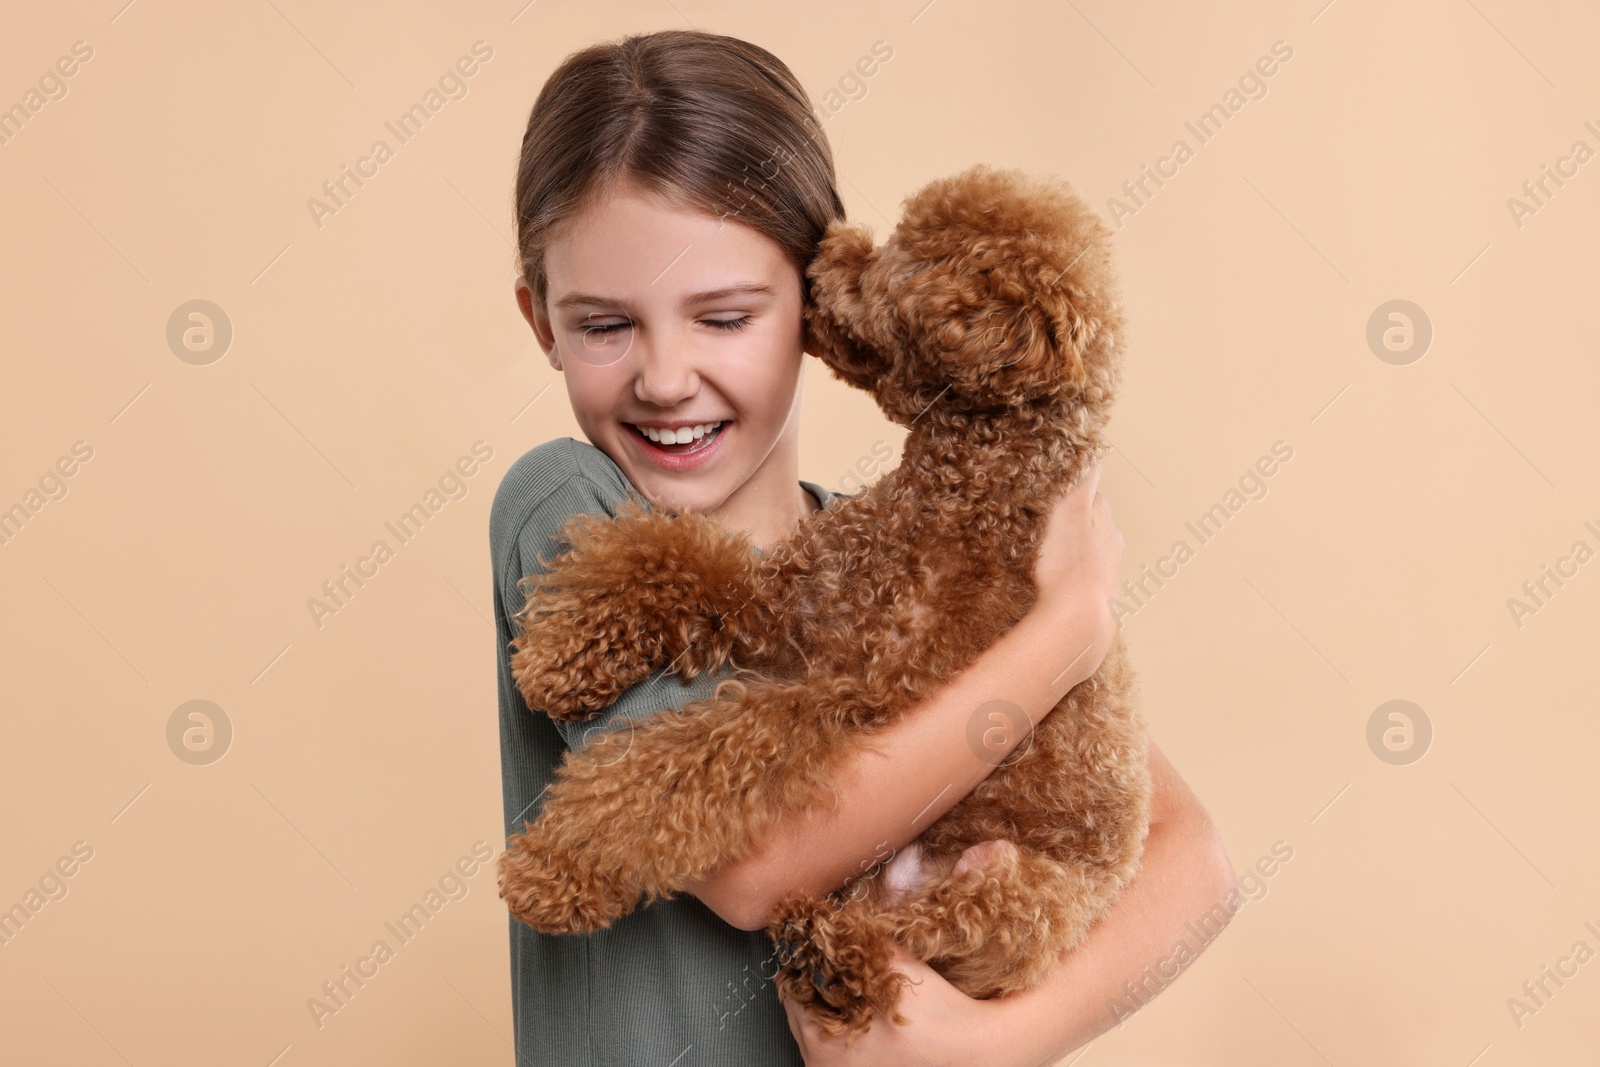 Photo of Little child with cute puppy on beige background. Lovely pet